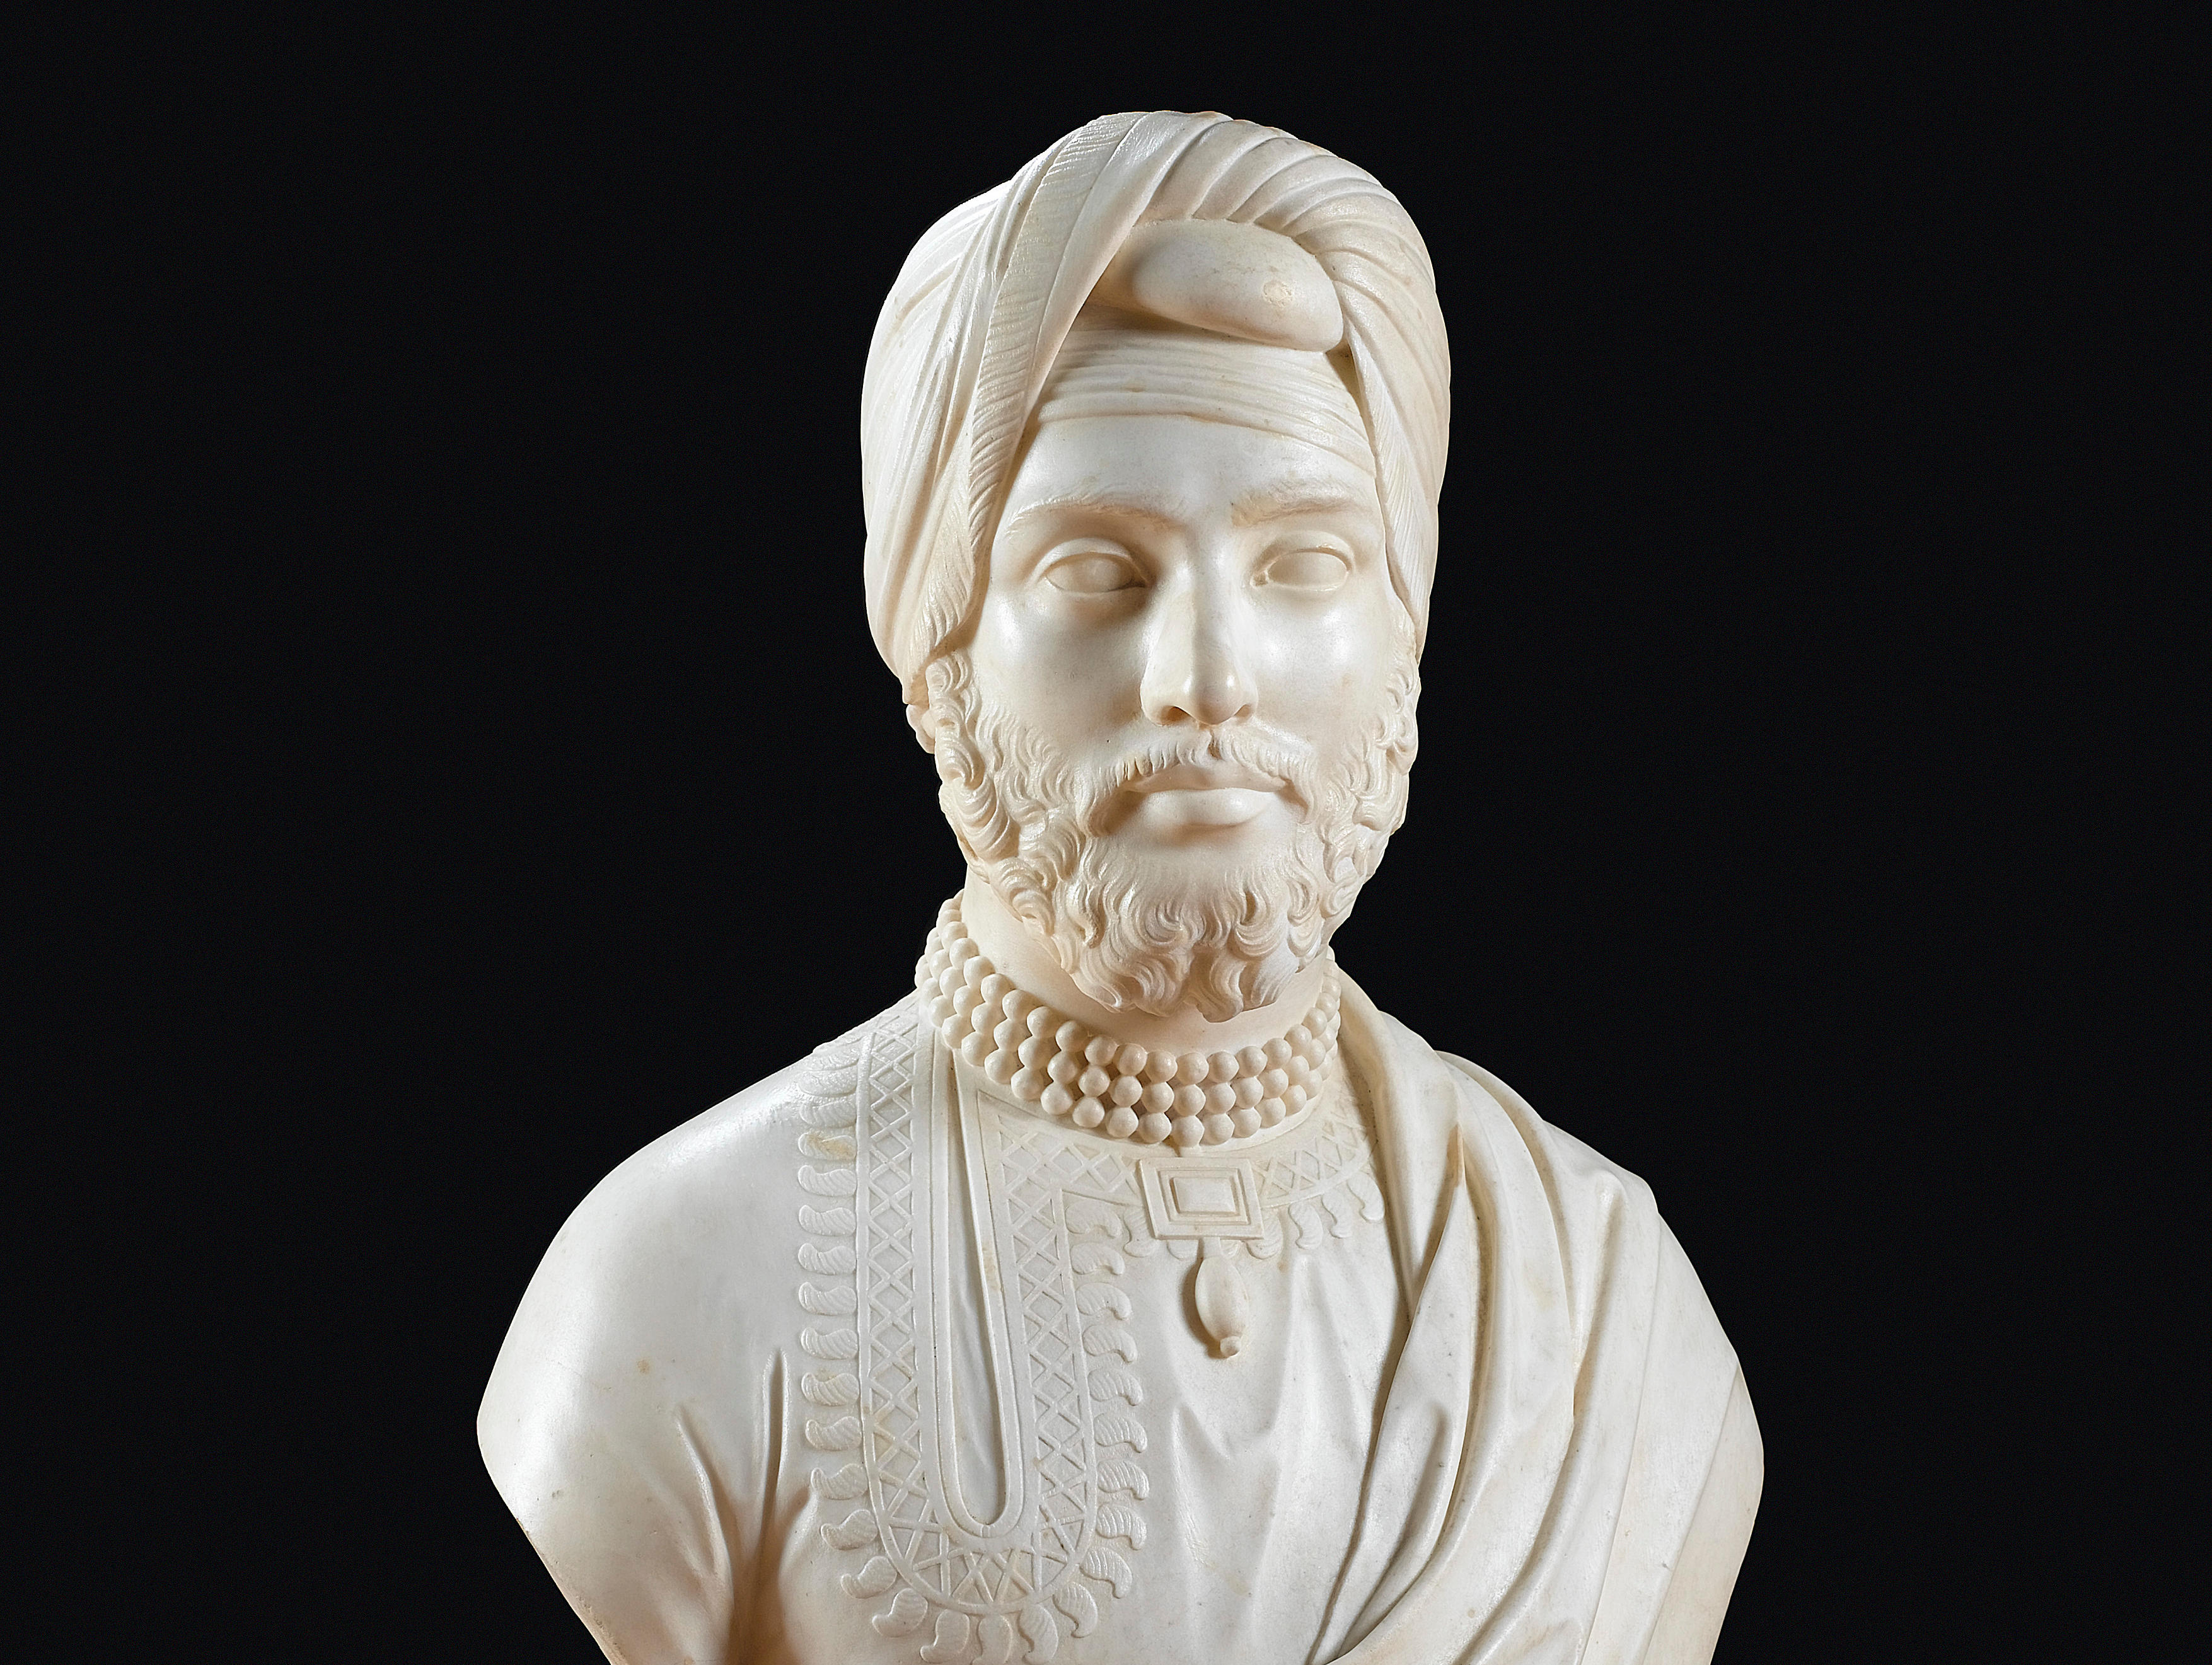 MAHARAJAH DULEEP SINGH, LAST RULER OF THE PUNJAB,  BY JOHN GIBSON RA, A PORTRAIT BUST SCULPTED IN ROME,  1859-60